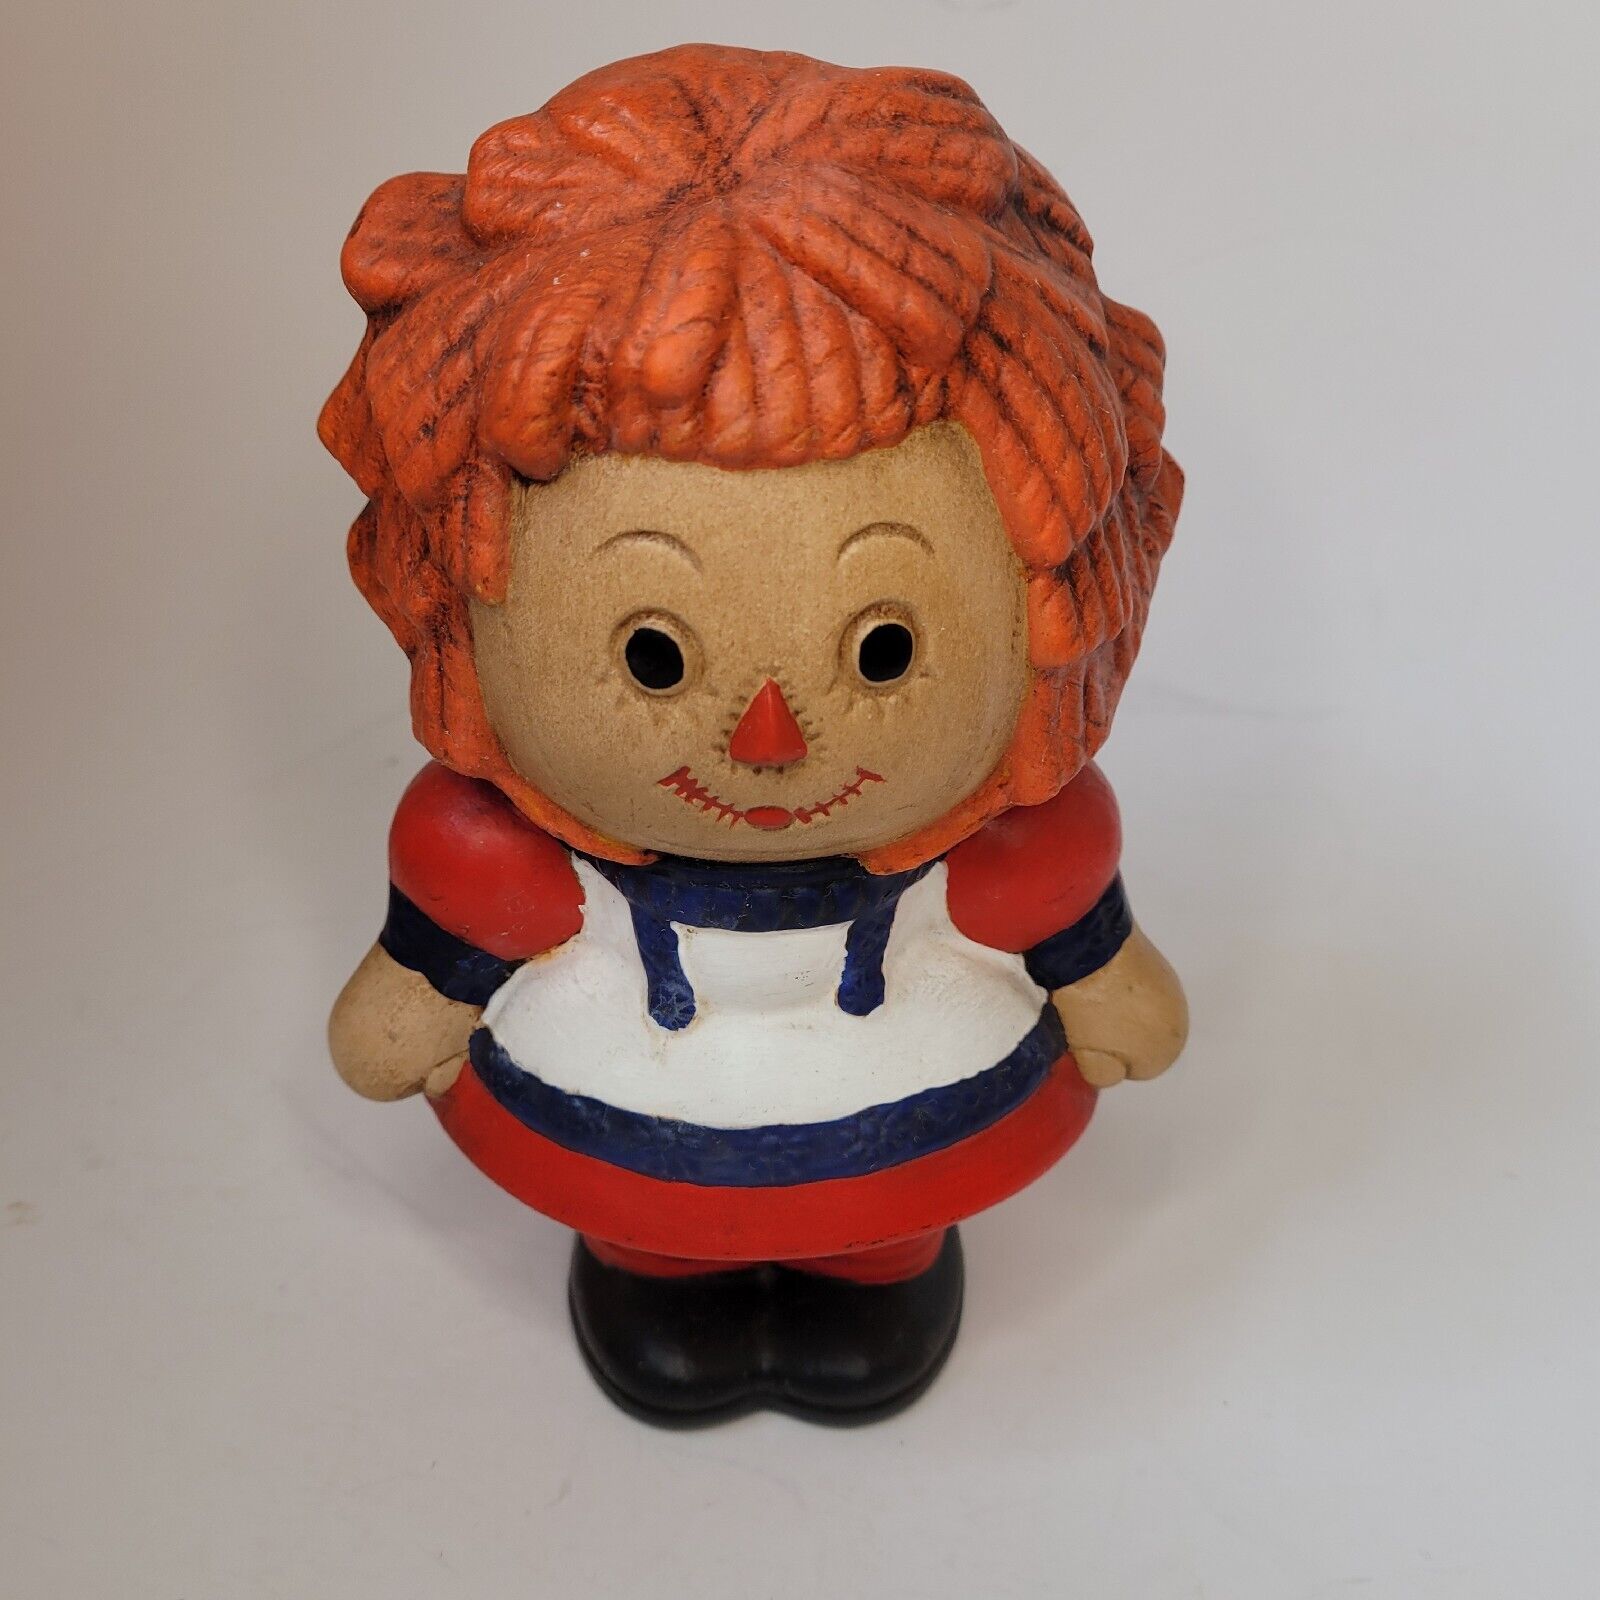 Vintage Raggedy Ann Ceramic Doll Figurine Hand Painted 1976 Collectible Decor